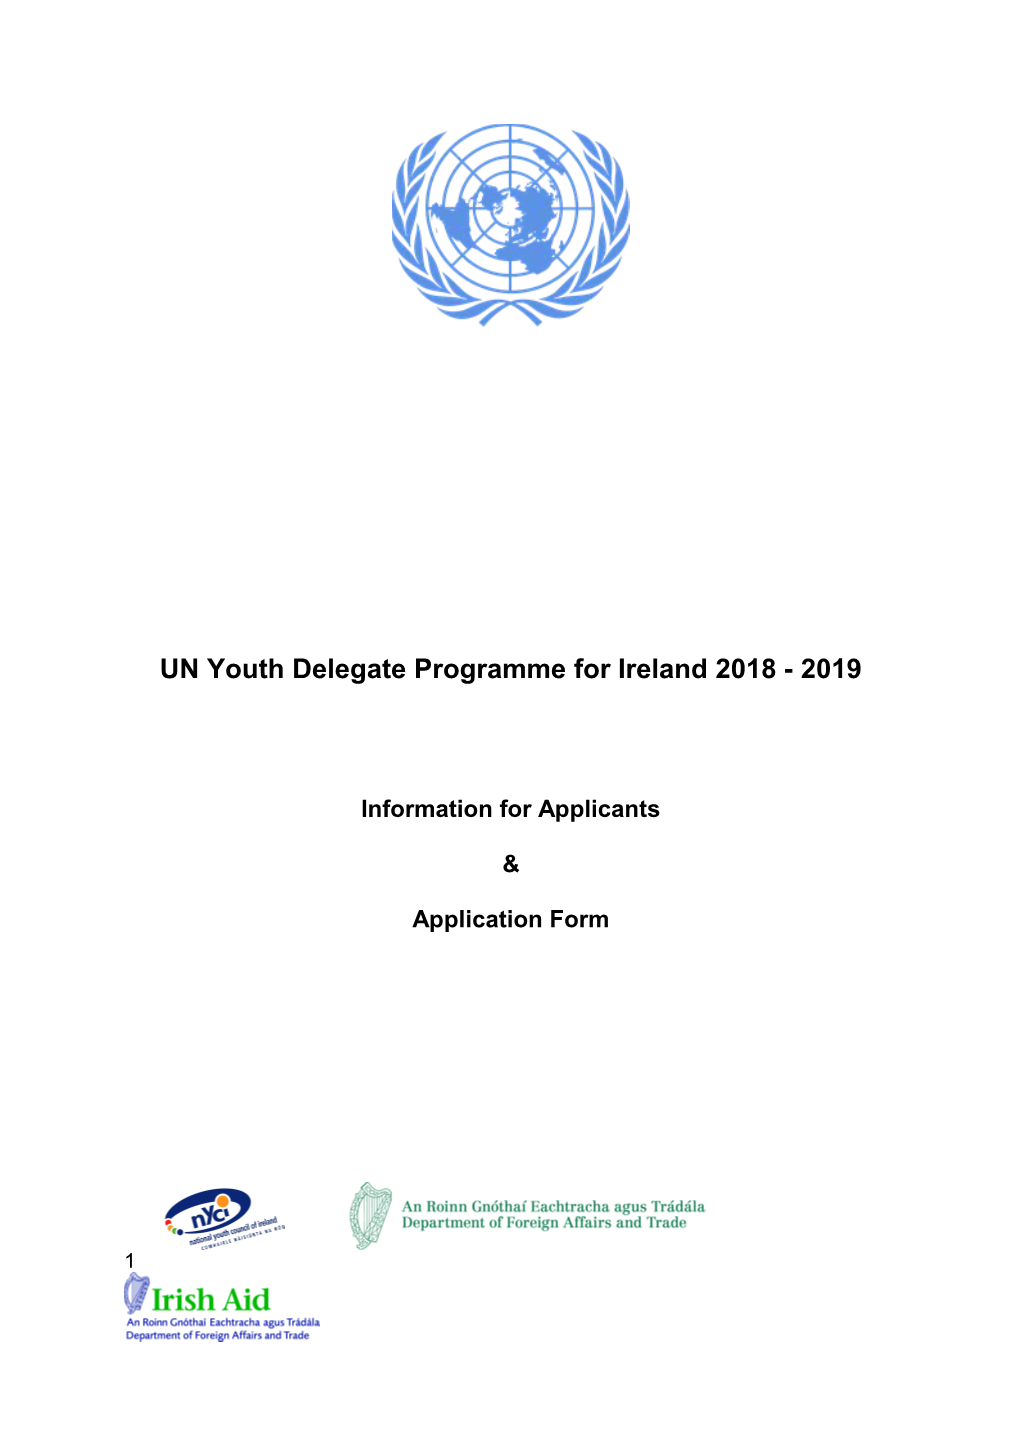 UN Youth Delegate Programme for Ireland 2018 - 2019